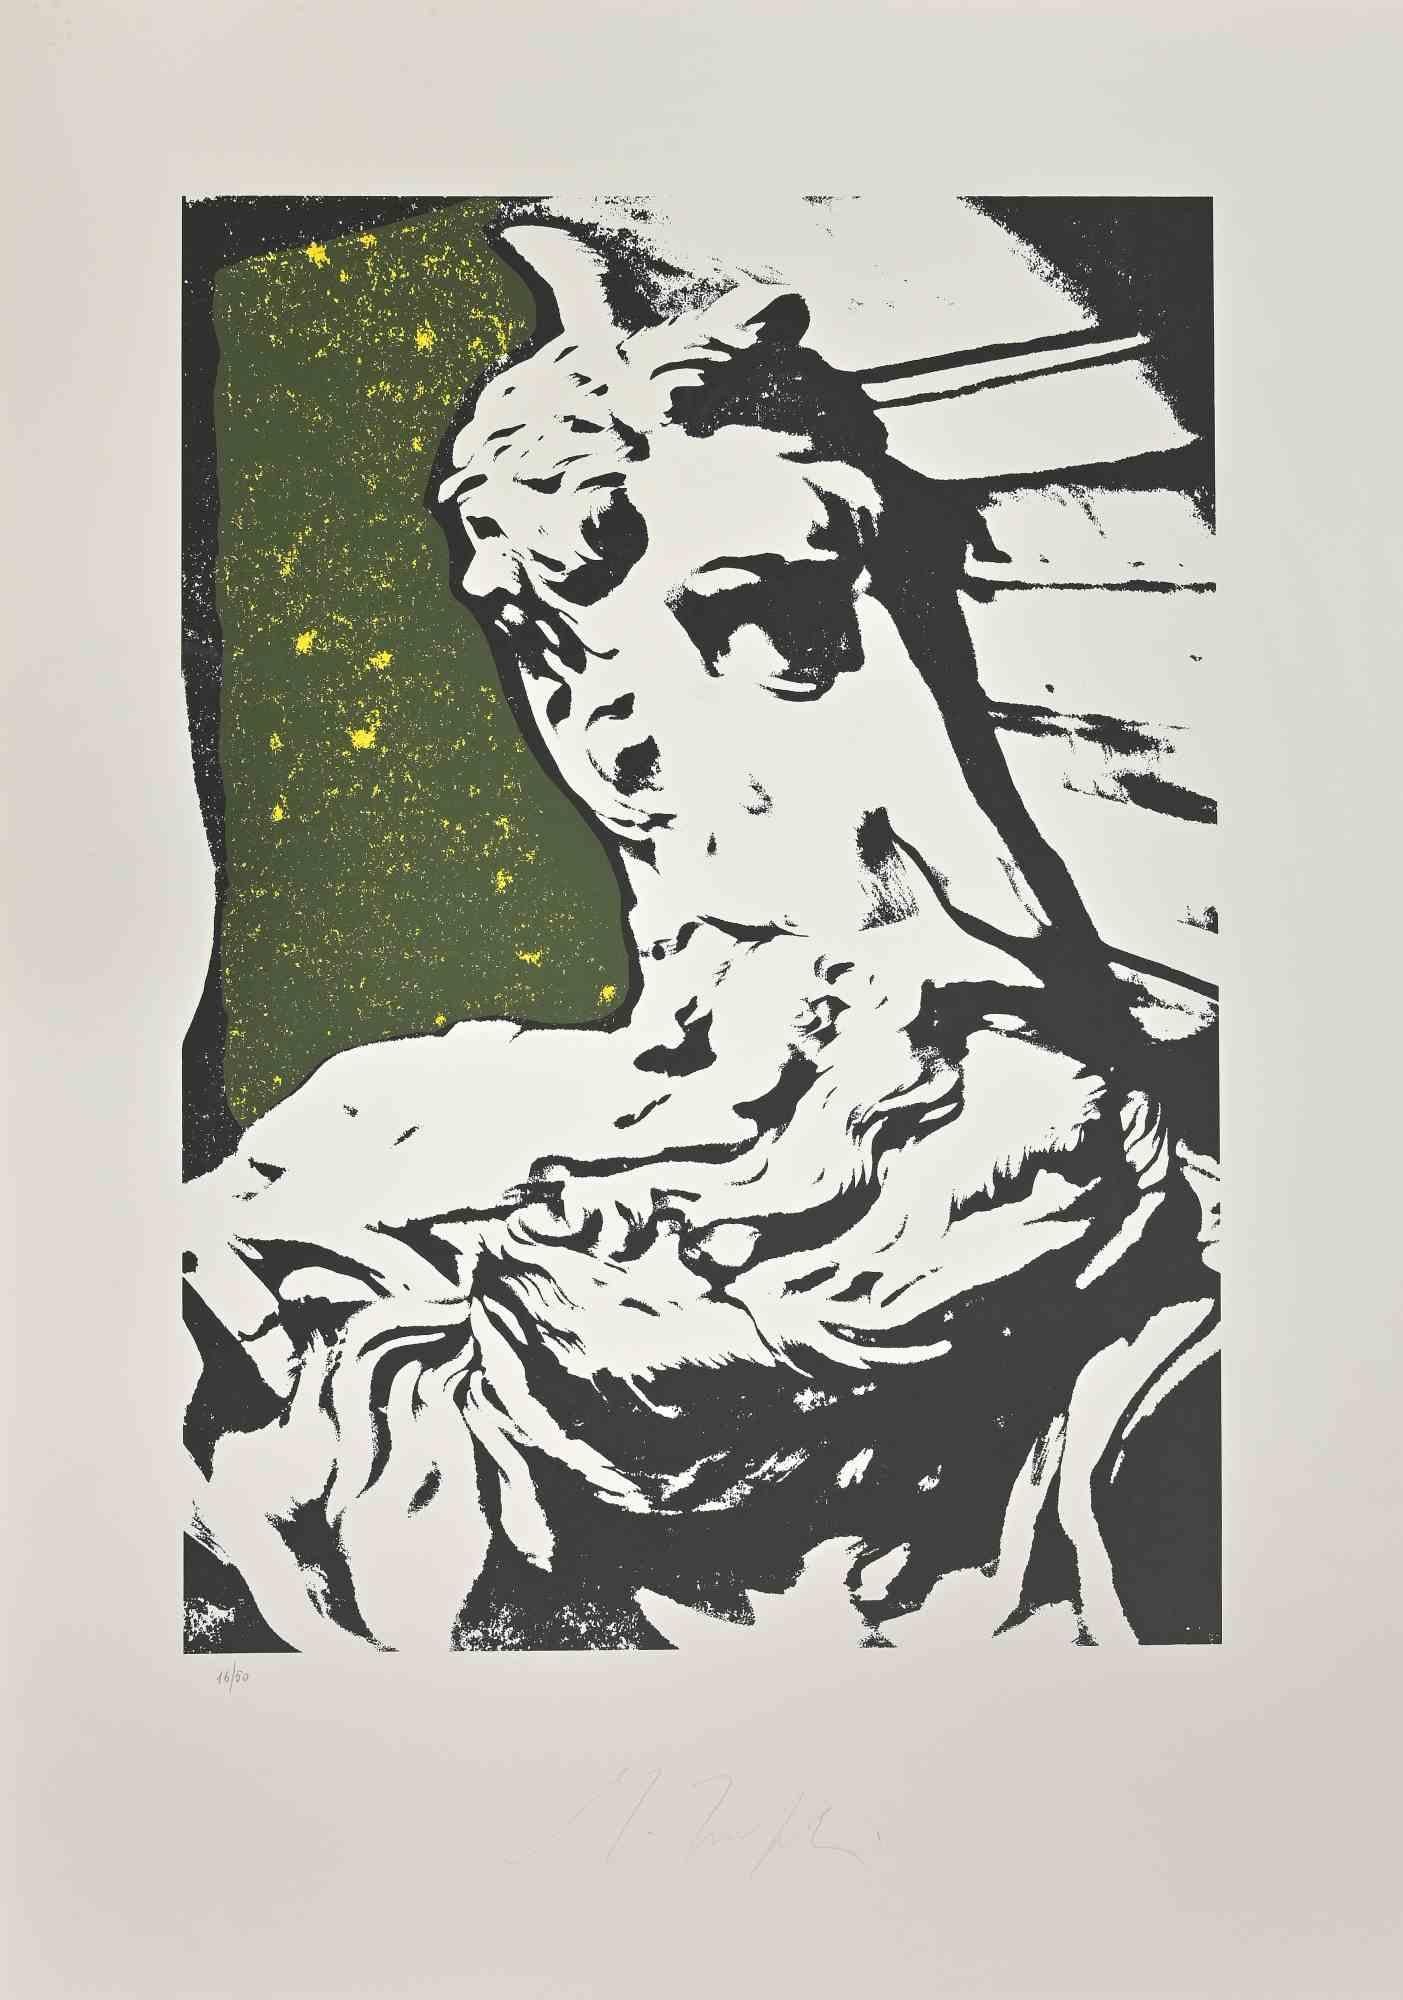 Screenprint, numbered and signed, by the Italian artist Mino Trafeli (Volterra, Italy 1922-2018).

Part of a portfolio of 13 5-color serigraphs made by Mino Trafeli and printed, with the help of the technical supervision of Aulo Guidi, by Ideogram,